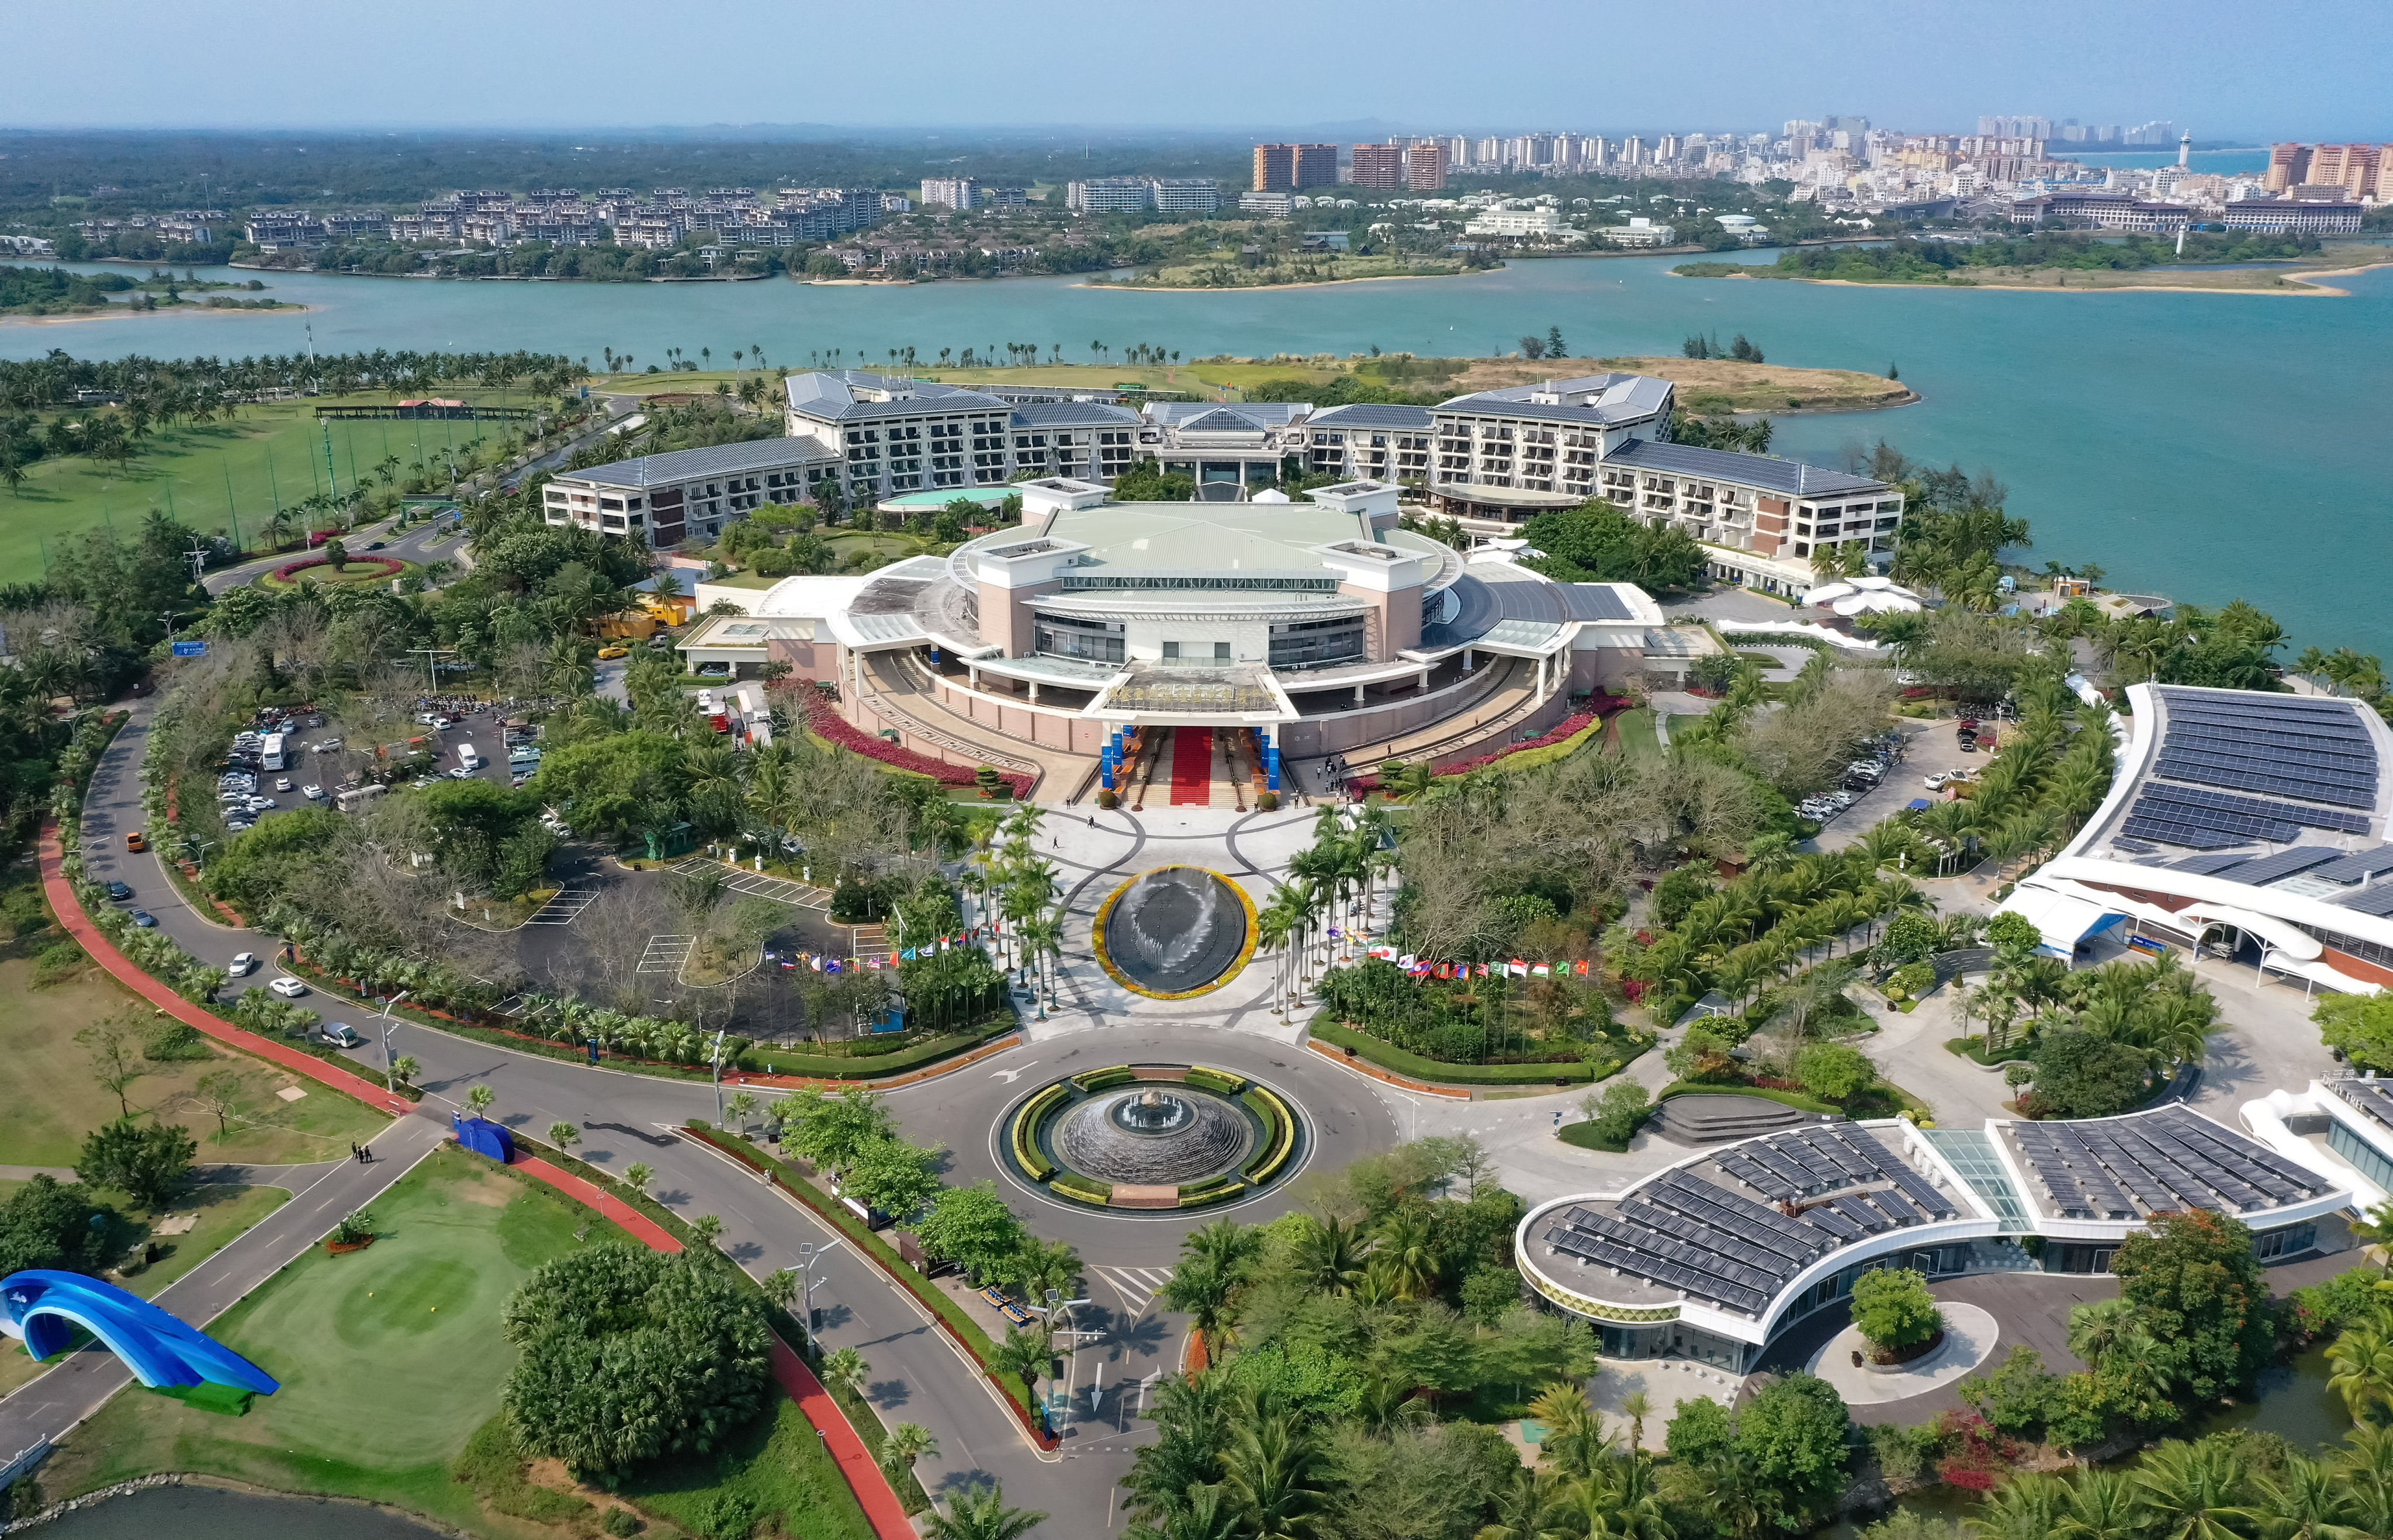 The Boao Forum for Asia International Conference Centre in Boao, Hainan province, China. Photo: Xinhua